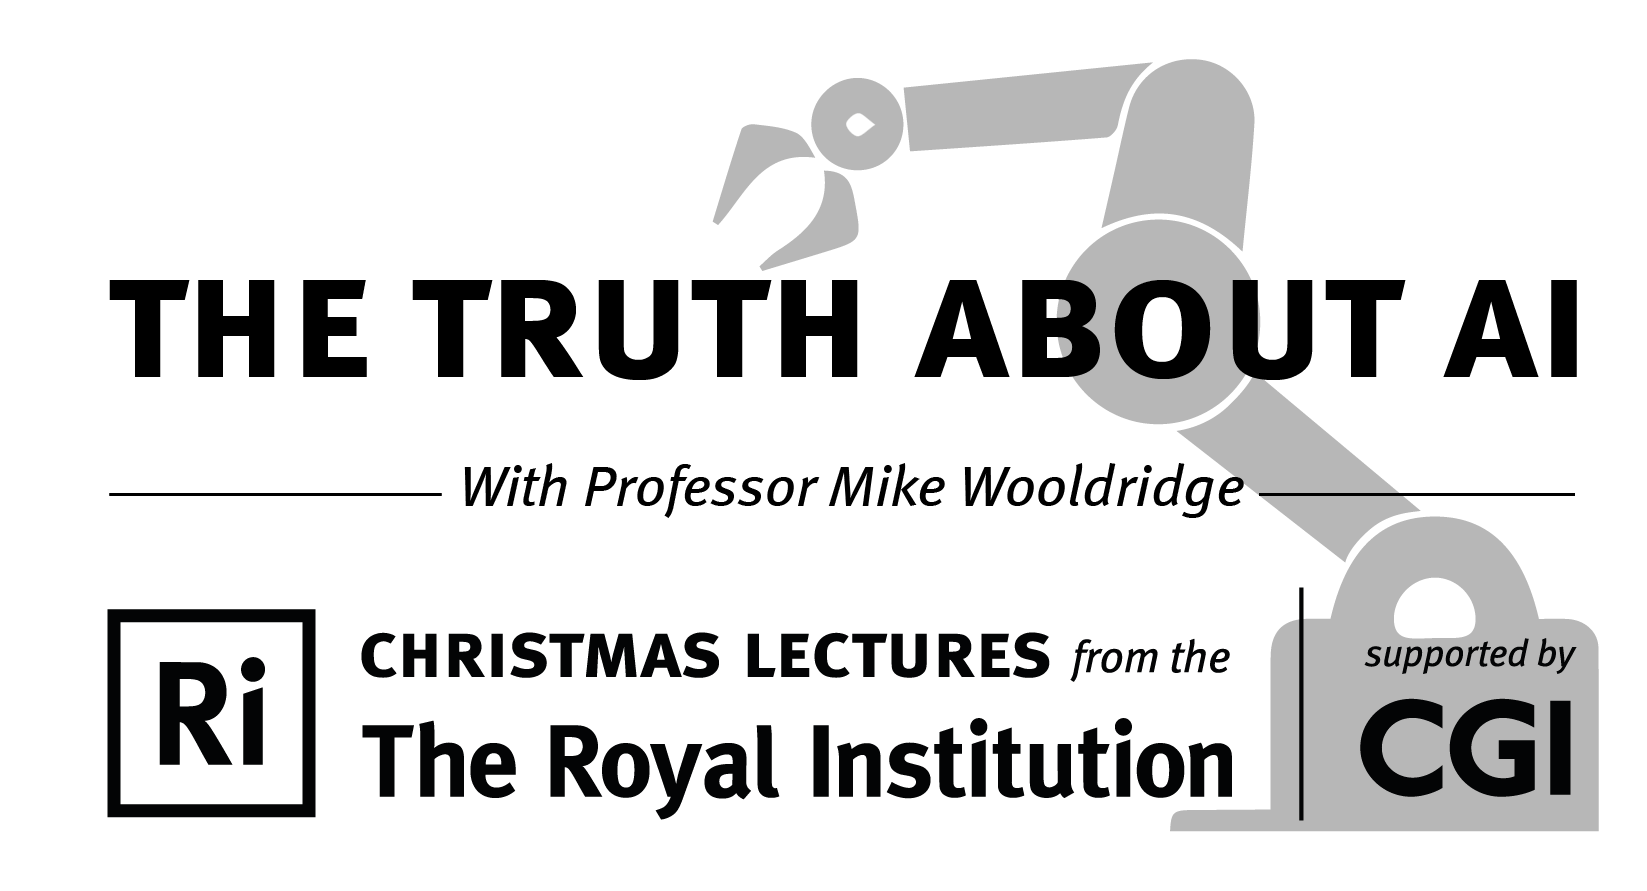 A logo for the Ri CHRISTMAS LECTURES featuring the text 'The Truth About AI with Professor Mike Woolridge' with a robot arm graphic in the background.